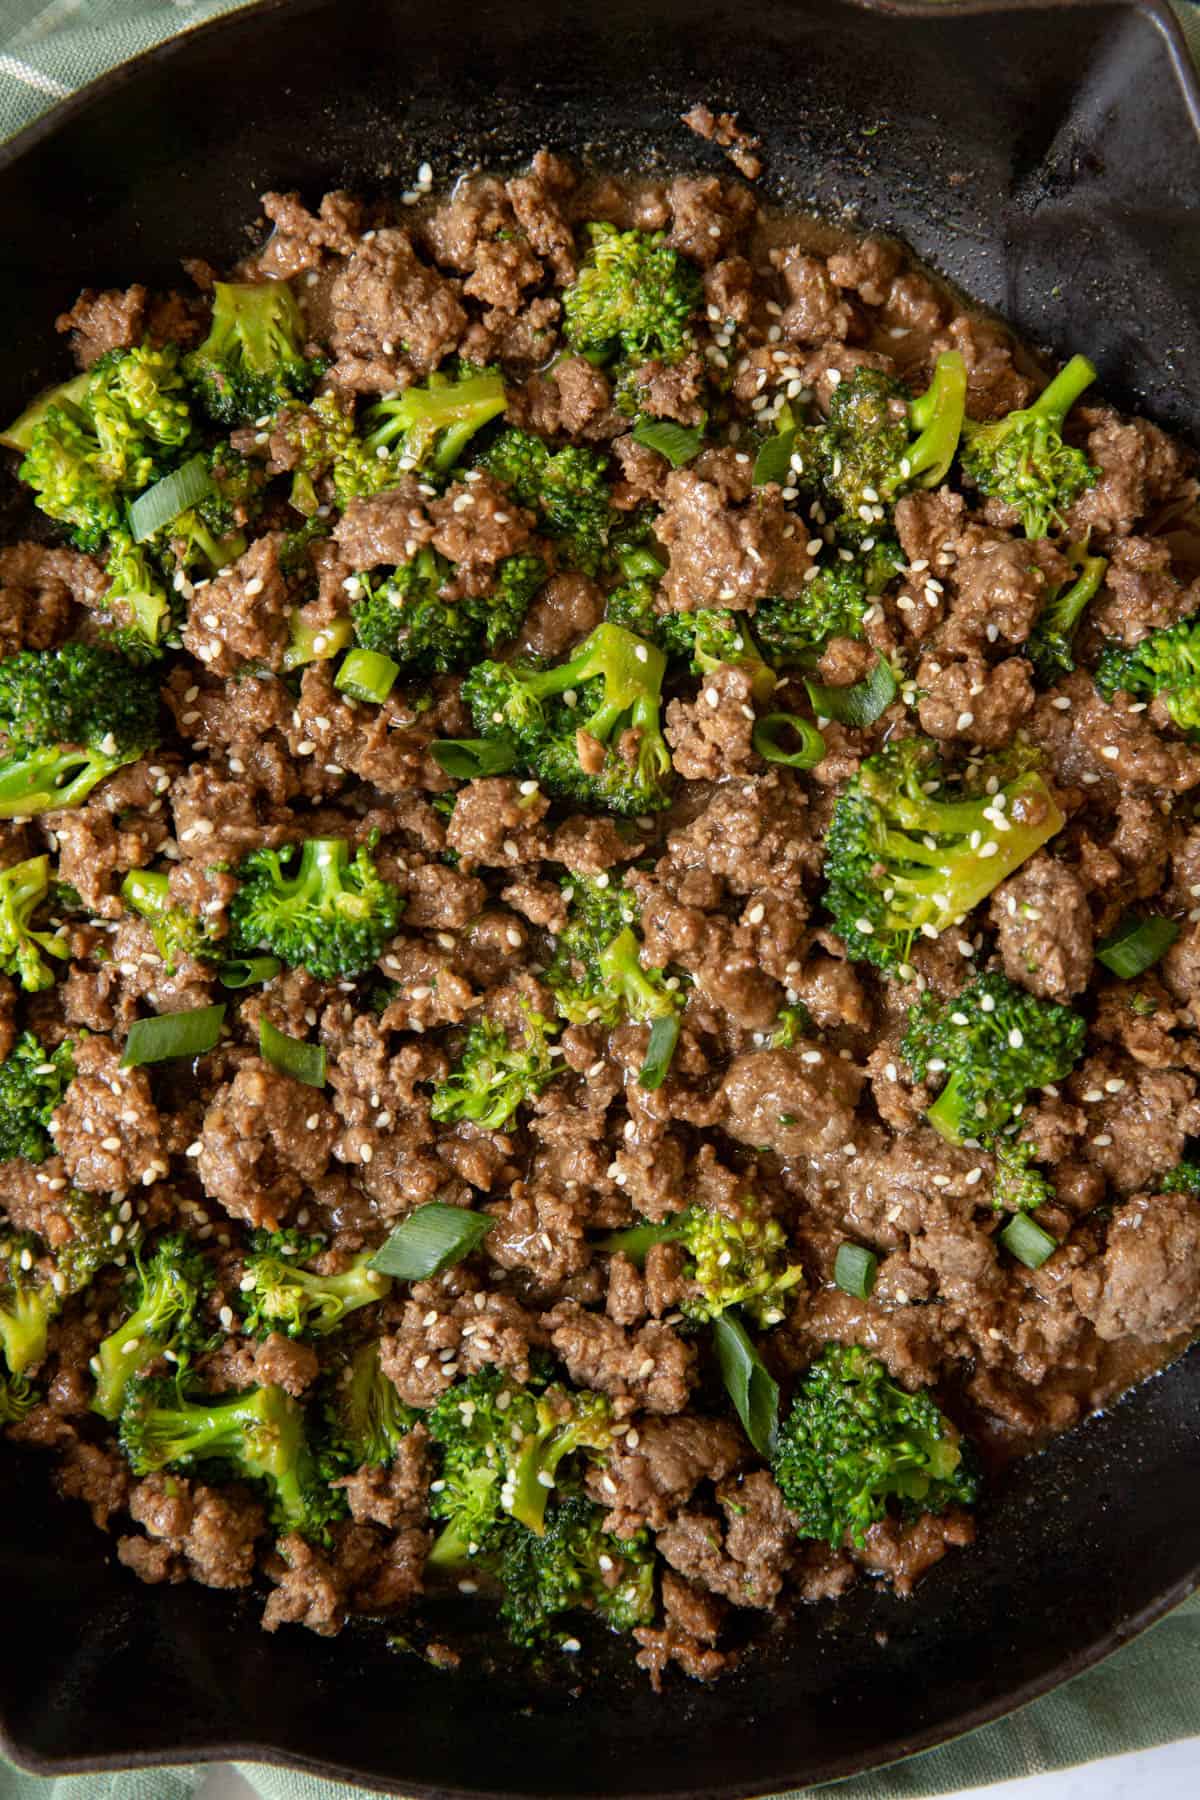 Cooked ground beef and broccoli in a skillet with sesame seeds and sliced green onions garnished on top.